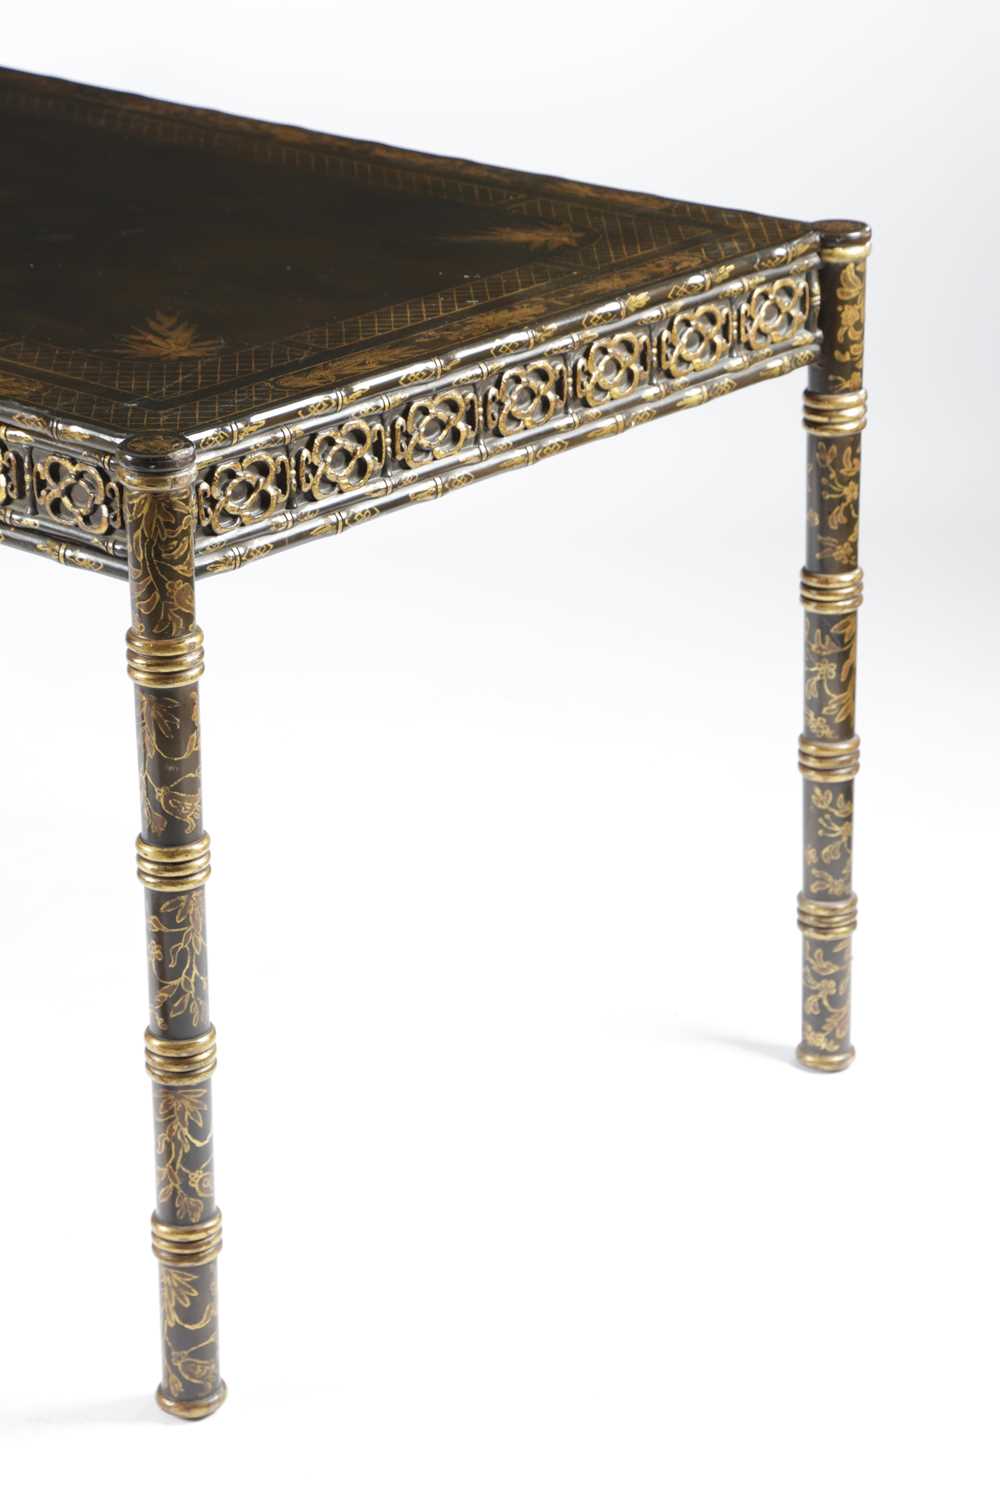 A BLACK JAPANNED WRITING TABLE IN REGENCY STYLE, AMERICAN, MID-20TH CENTURY with parcel gilt - Image 2 of 3